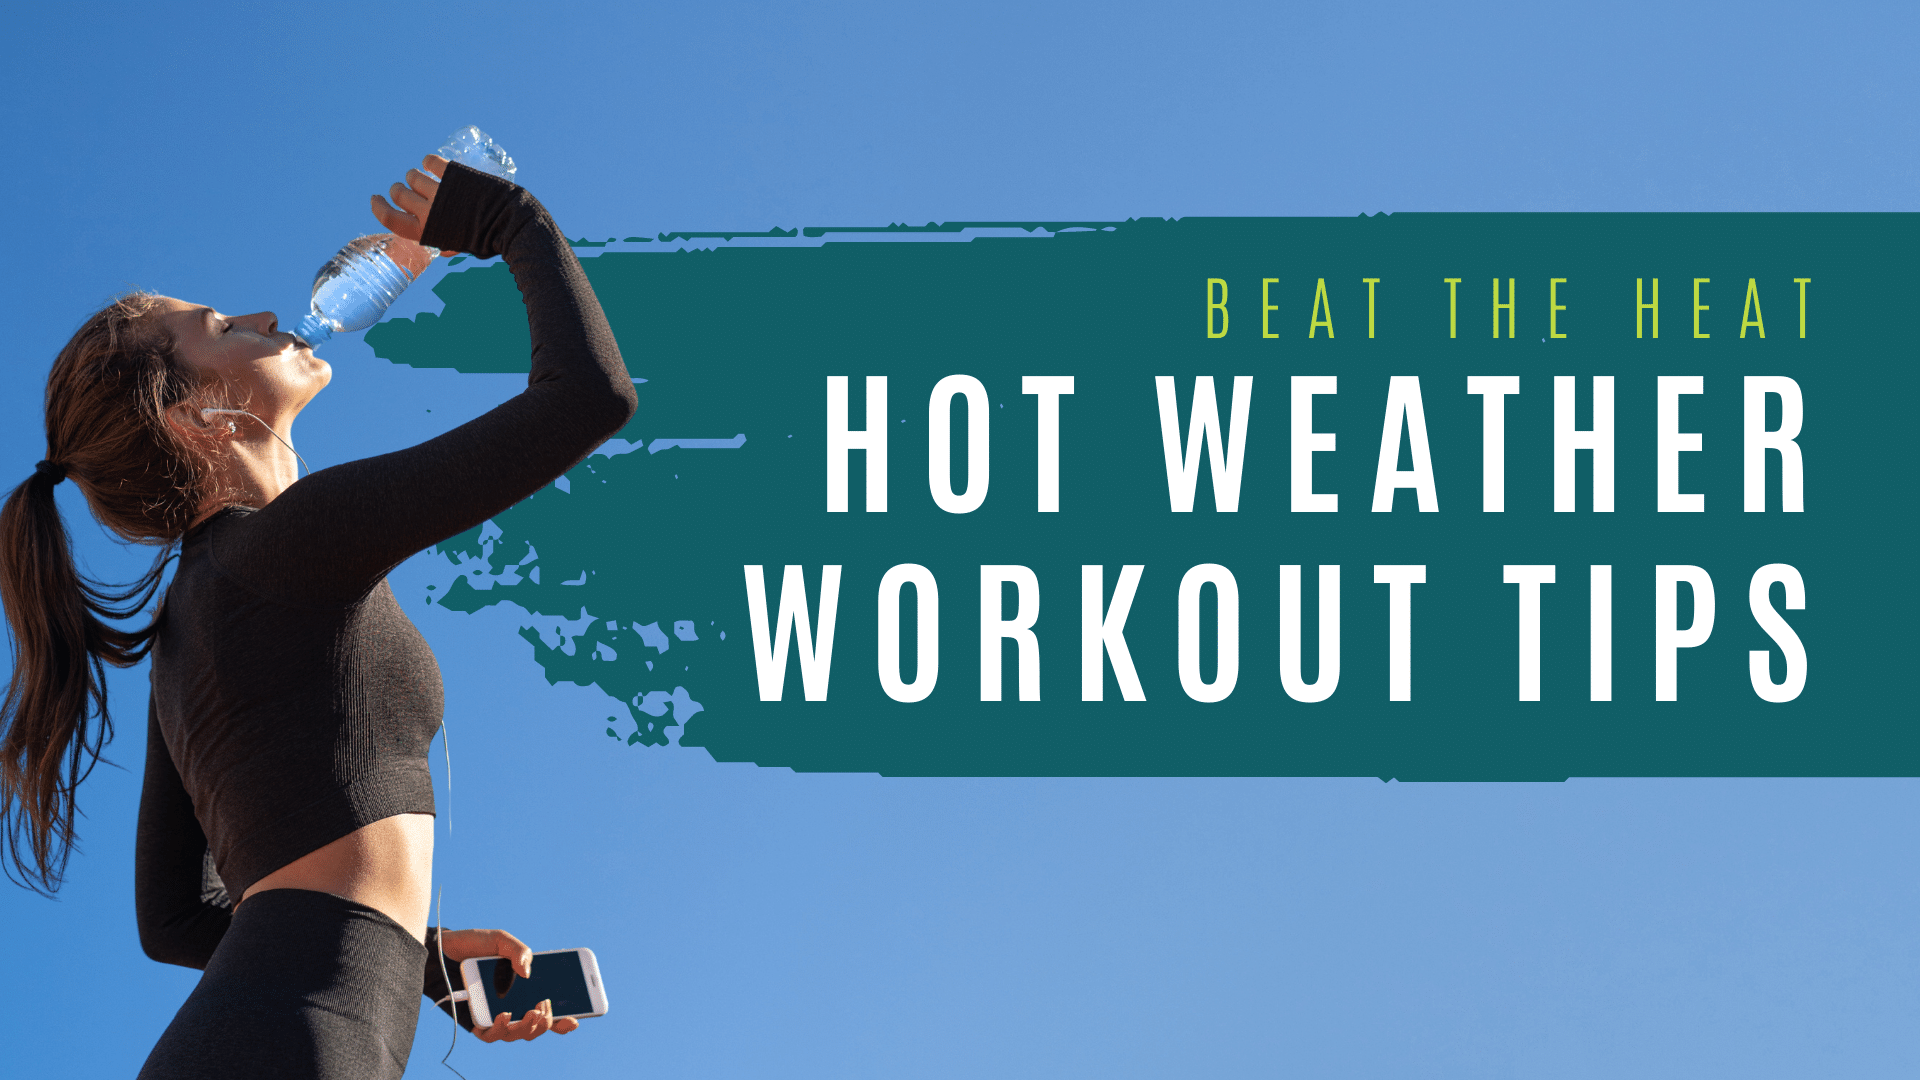 6 Tips to Make Working Out in Summer's Heat and Humidity More Tolerable -  Fitbit Blog